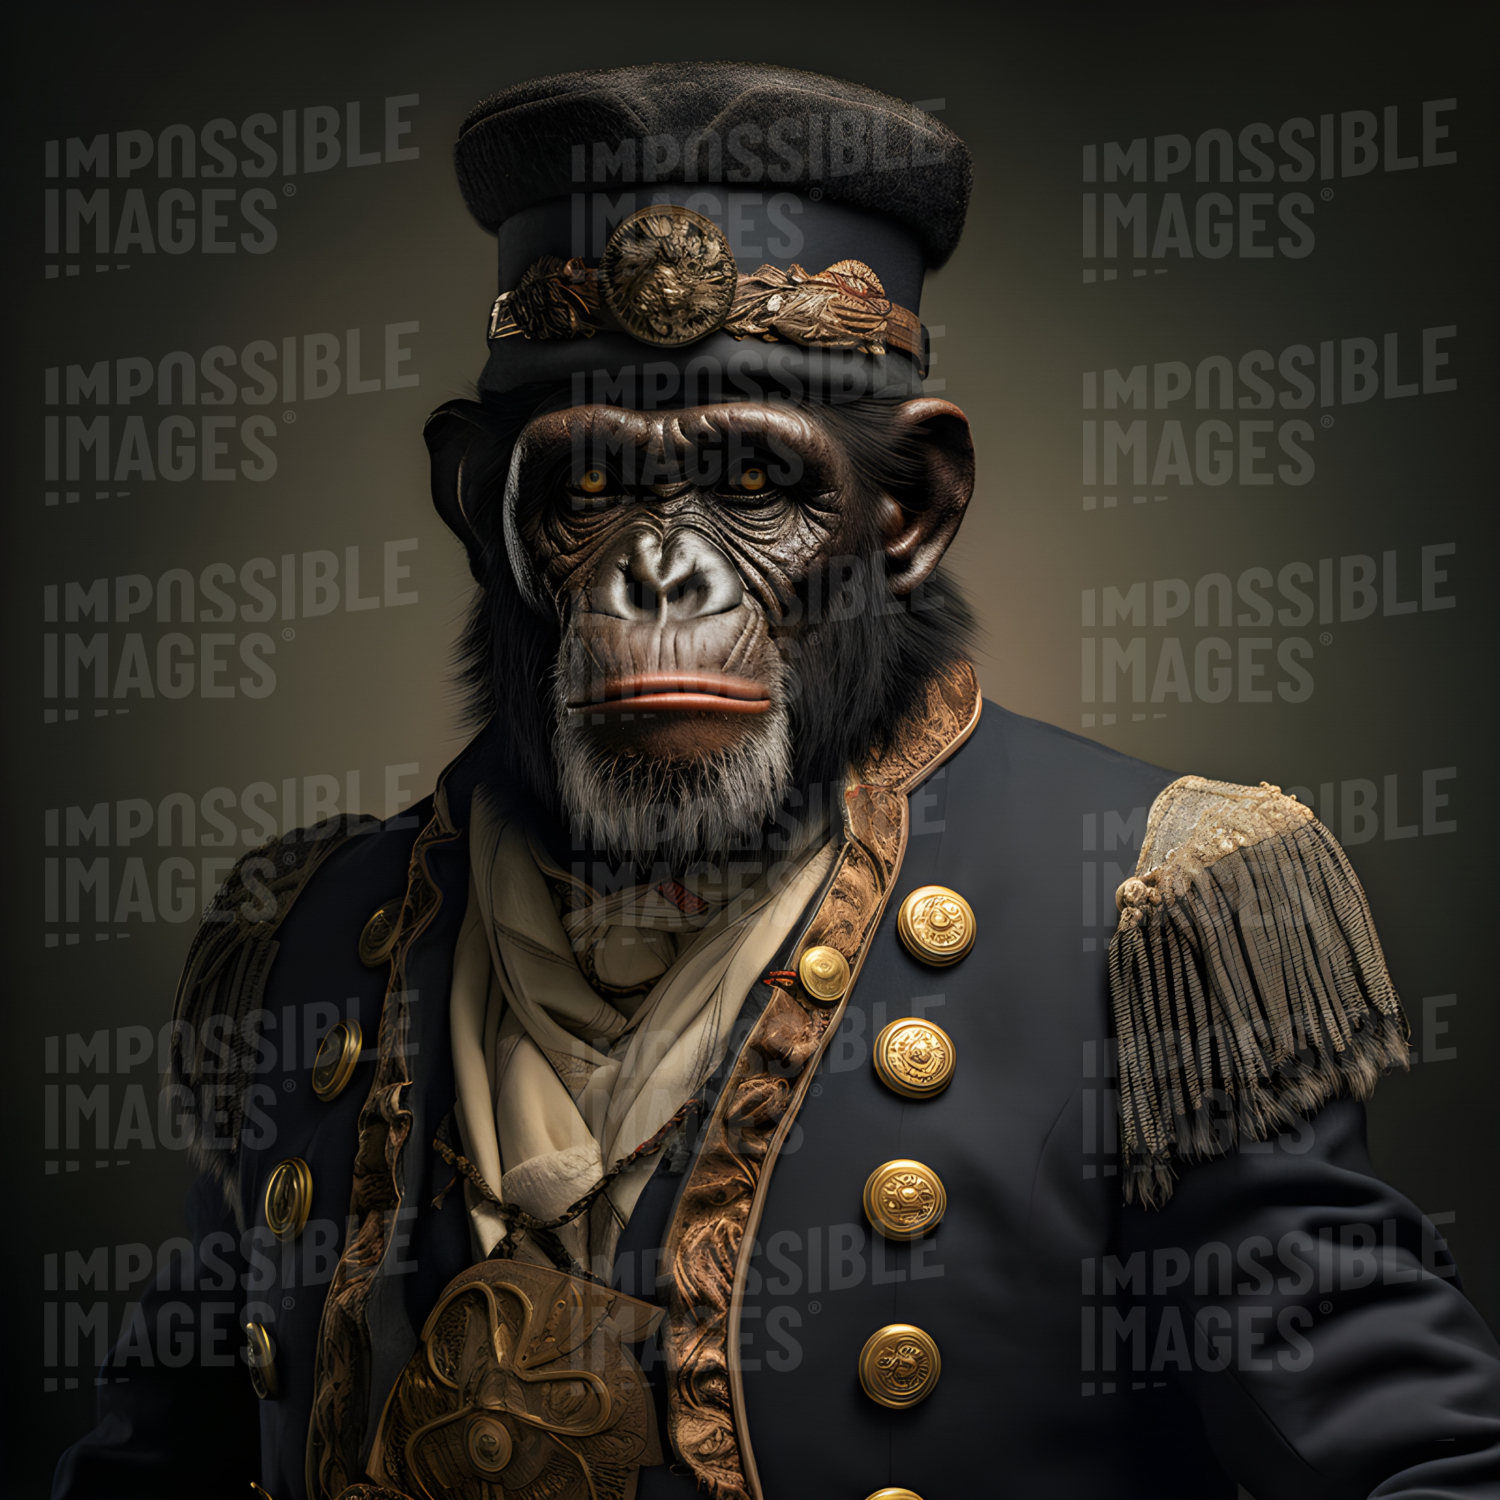 Portrait of a chimpanee in Victorian-style military uniform -  A portrait of a chimpanzee wearing a Victorian-style military uniform, complete with a hat, epaulettes, and a sash.